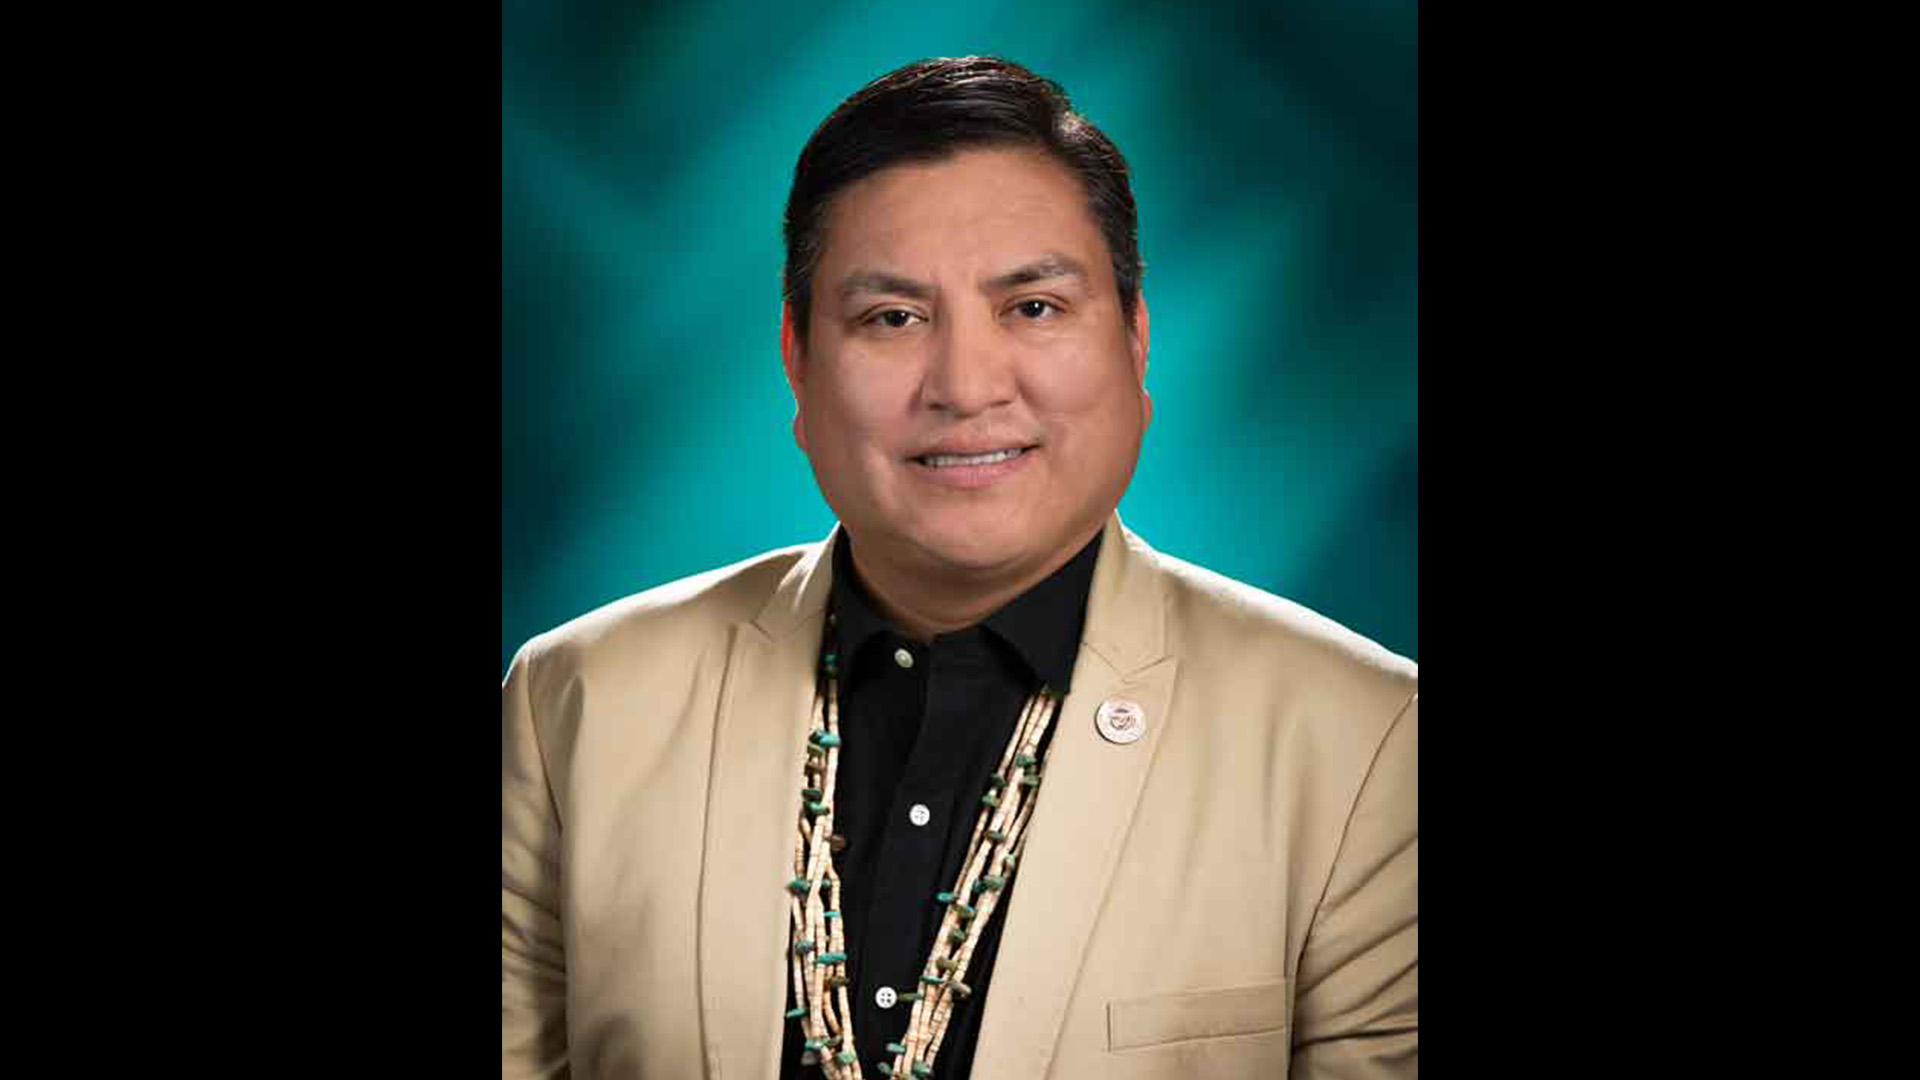 Former Arizona State Representative Arlando Teller, who is a member of the Navajo Nation, resigned in January 2021 after accepting a job with the U.S. Department of Transportation as the deputy assistant secretary for tribal affairs.